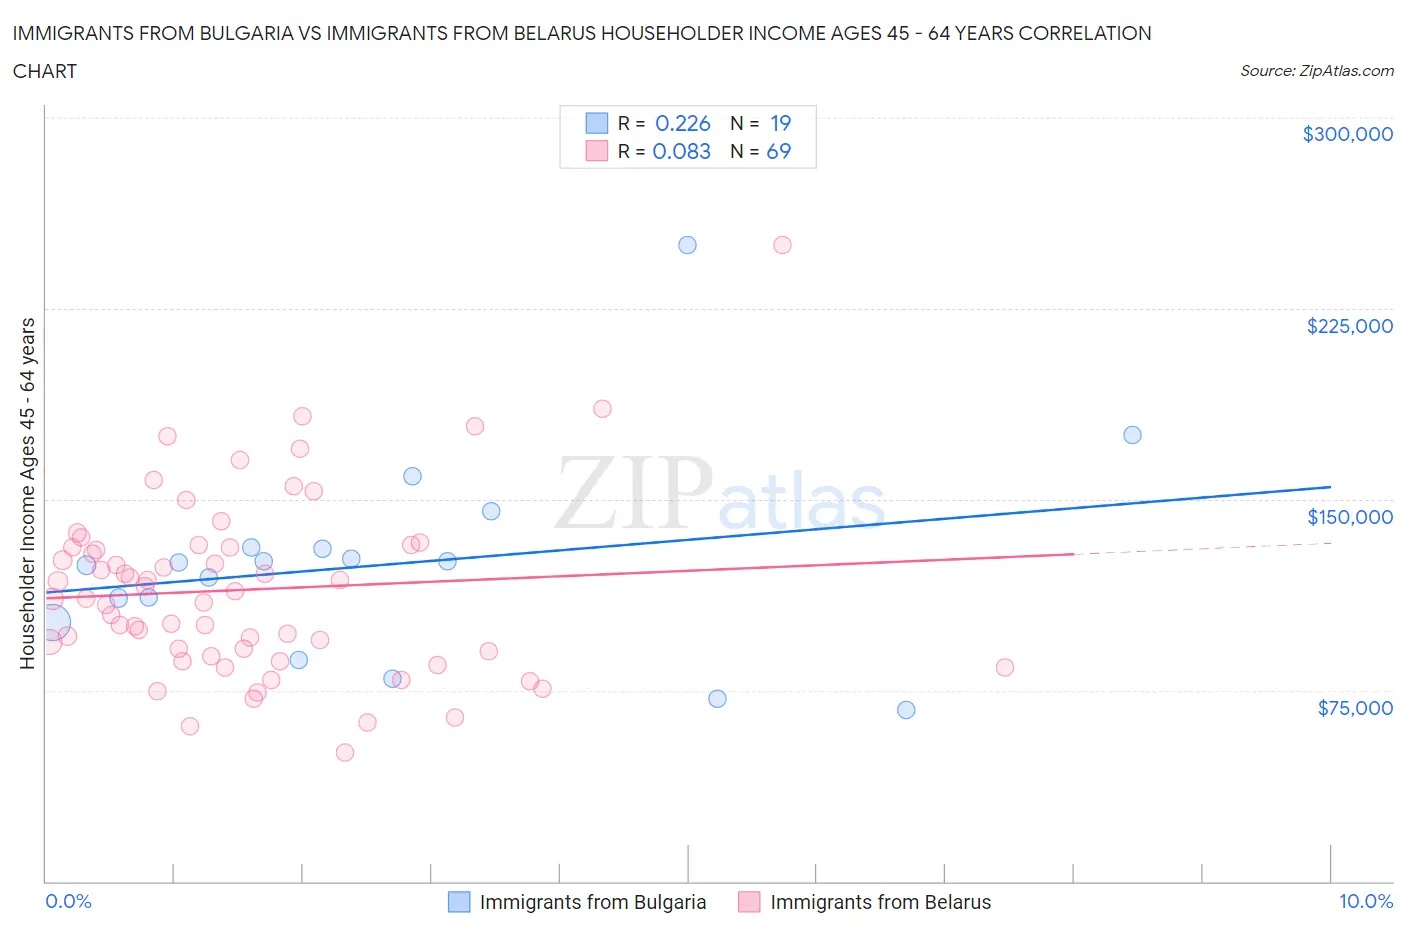 Immigrants from Bulgaria vs Immigrants from Belarus Householder Income Ages 45 - 64 years